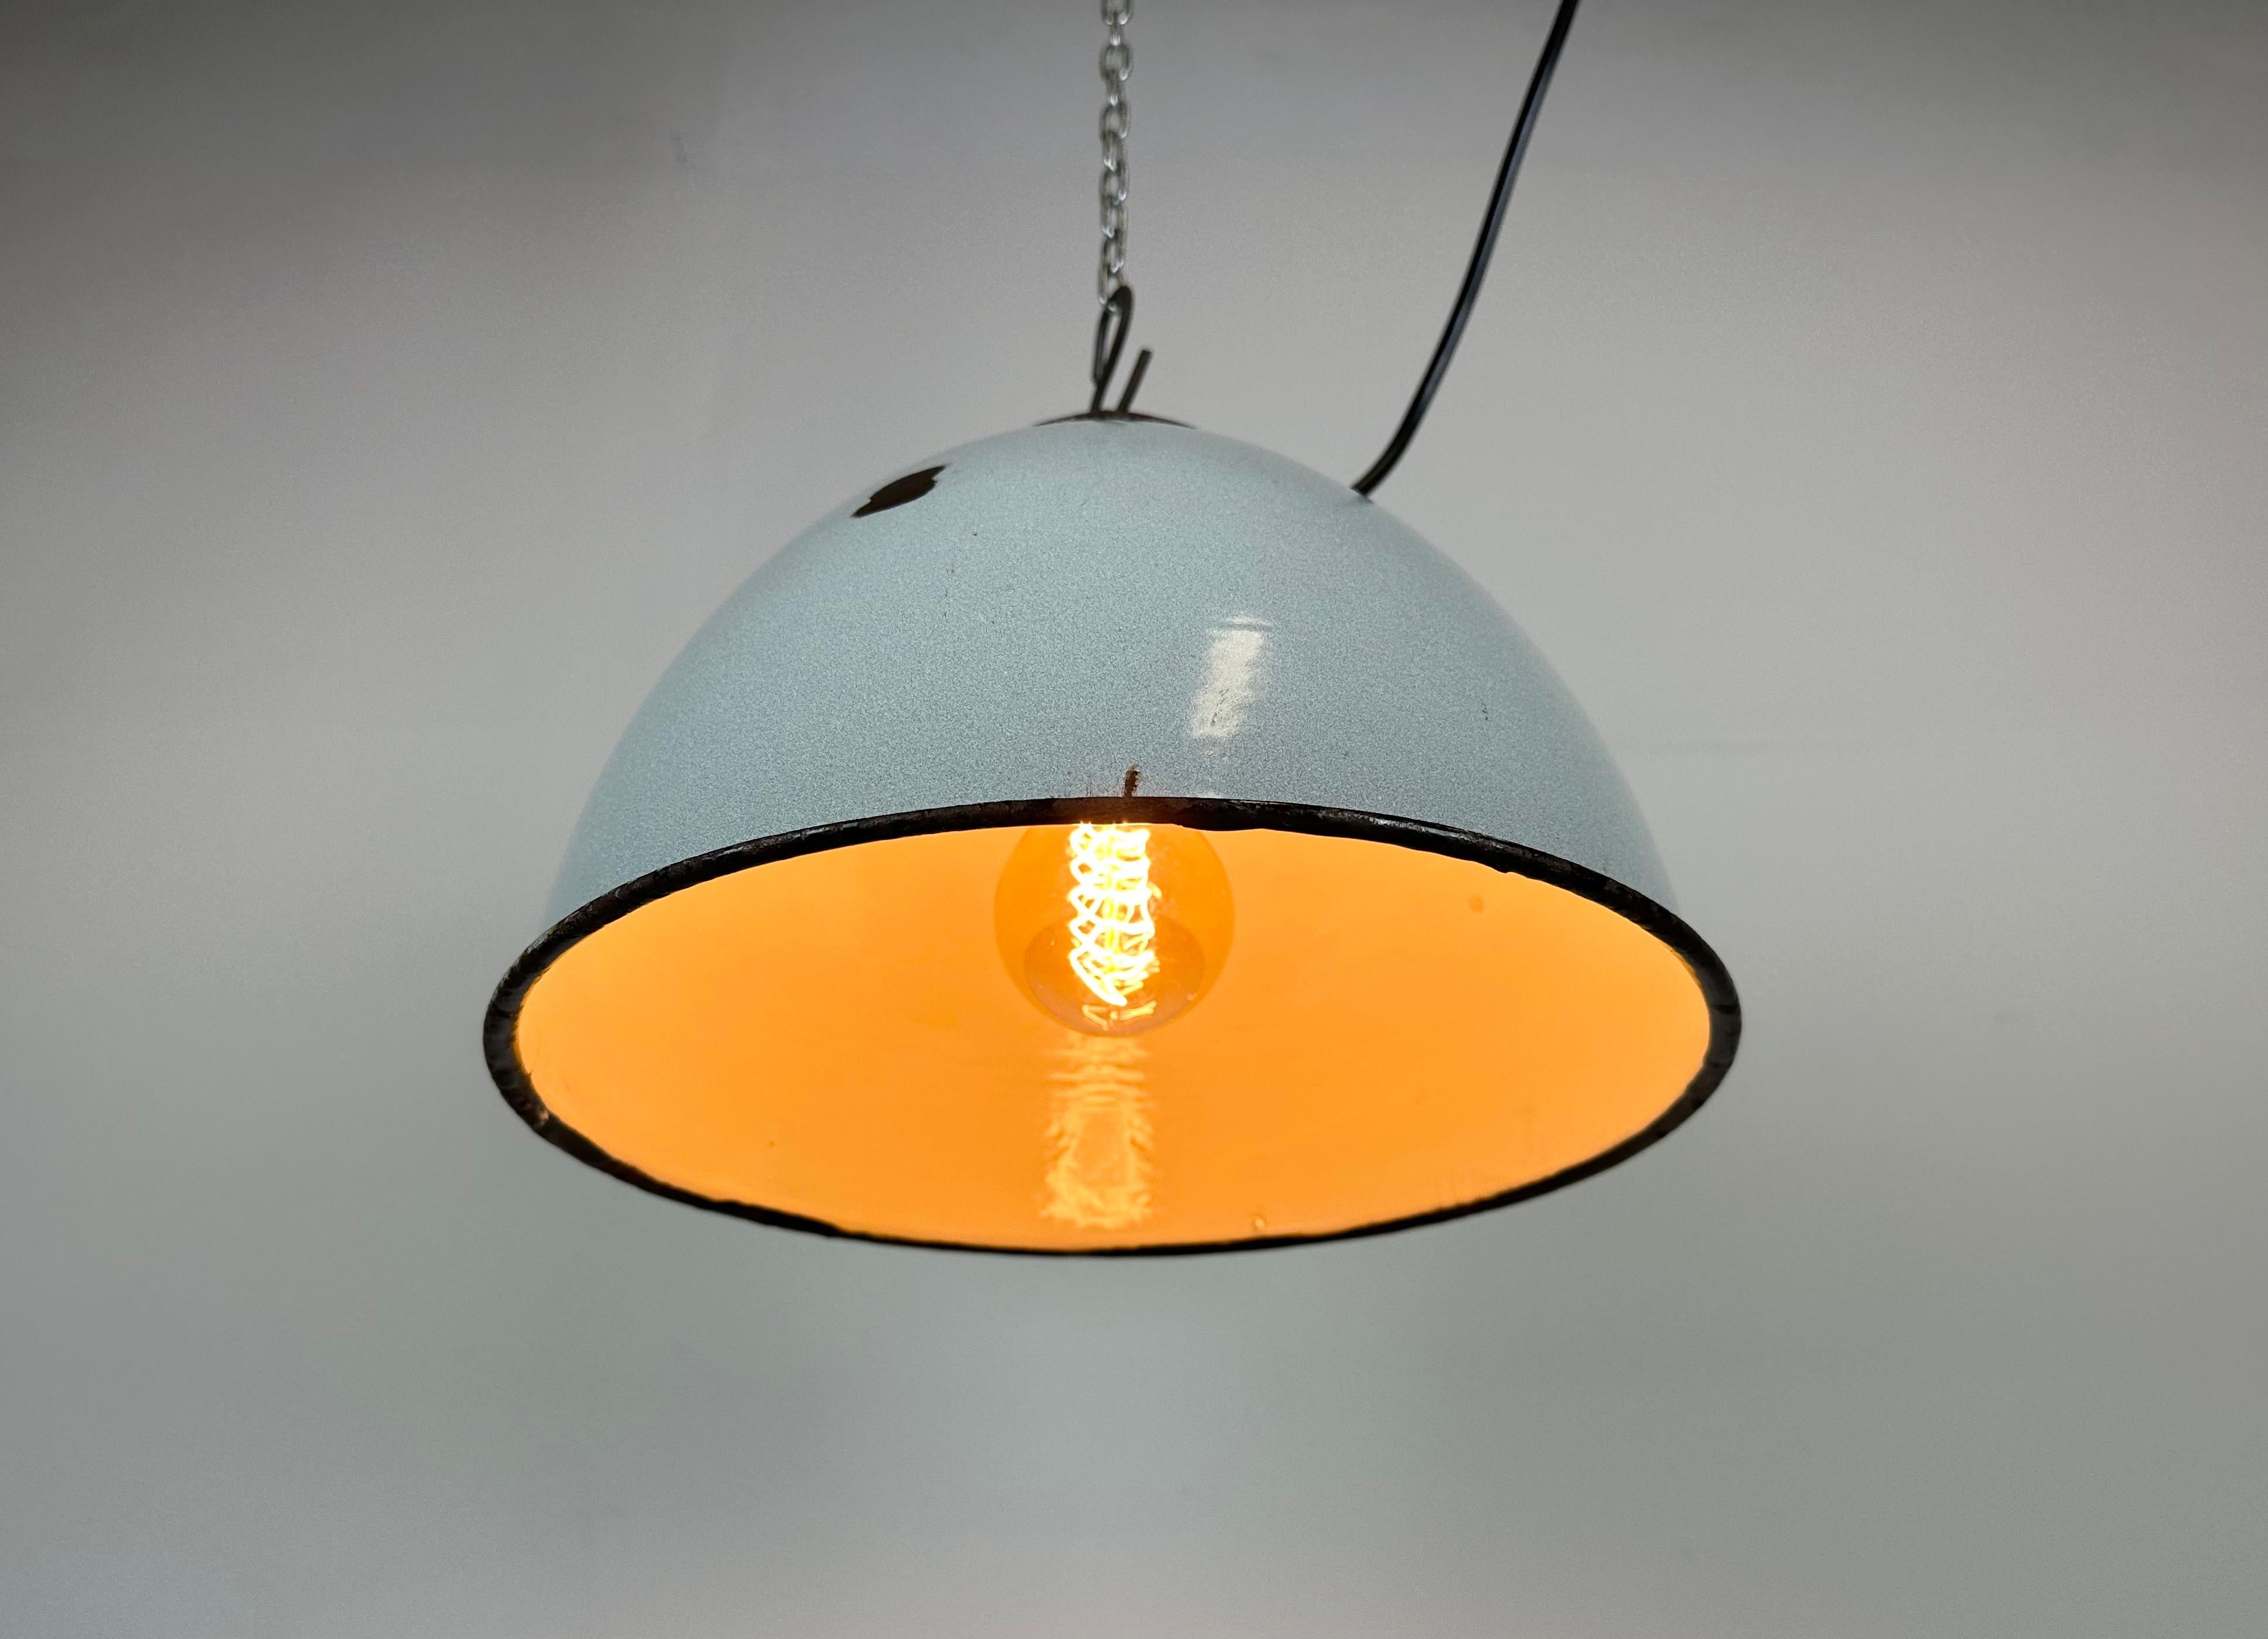 Industrial Grey Enamel Factory Lamp with Cast Iron Top, 1960s For Sale 4